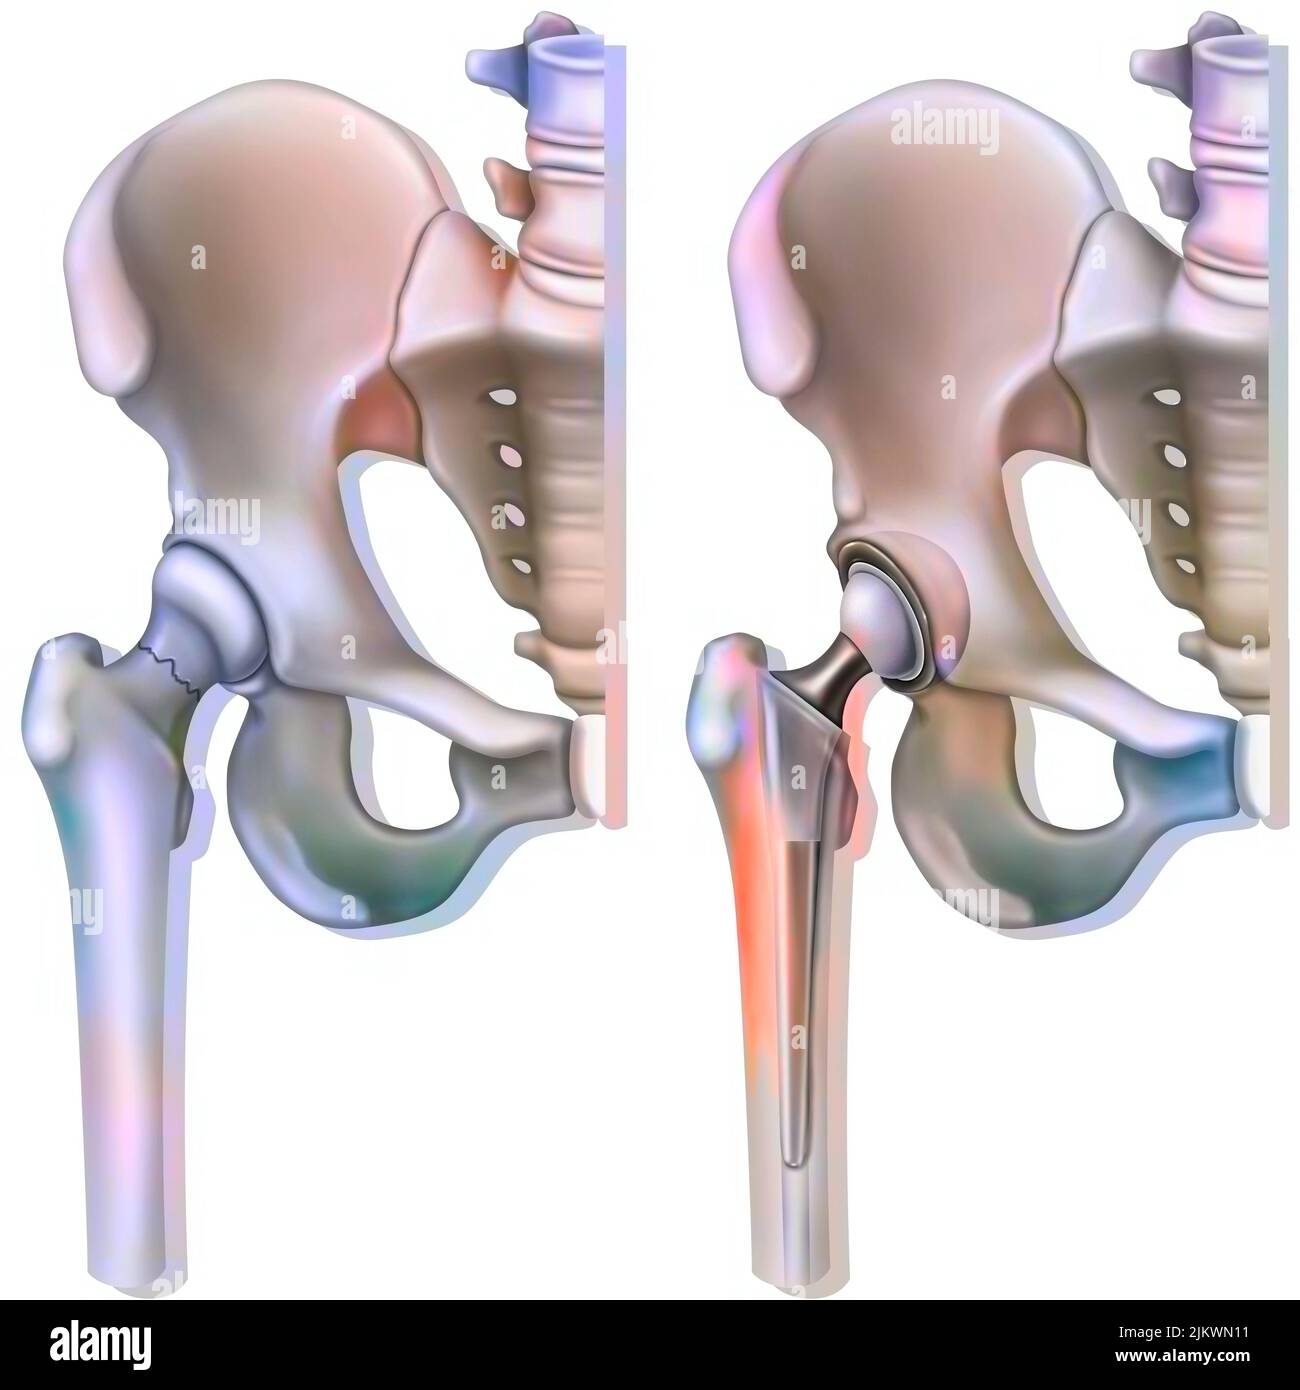 Femoral neck fracture (osteoporosis) and hip prosthesis. Stock Photo